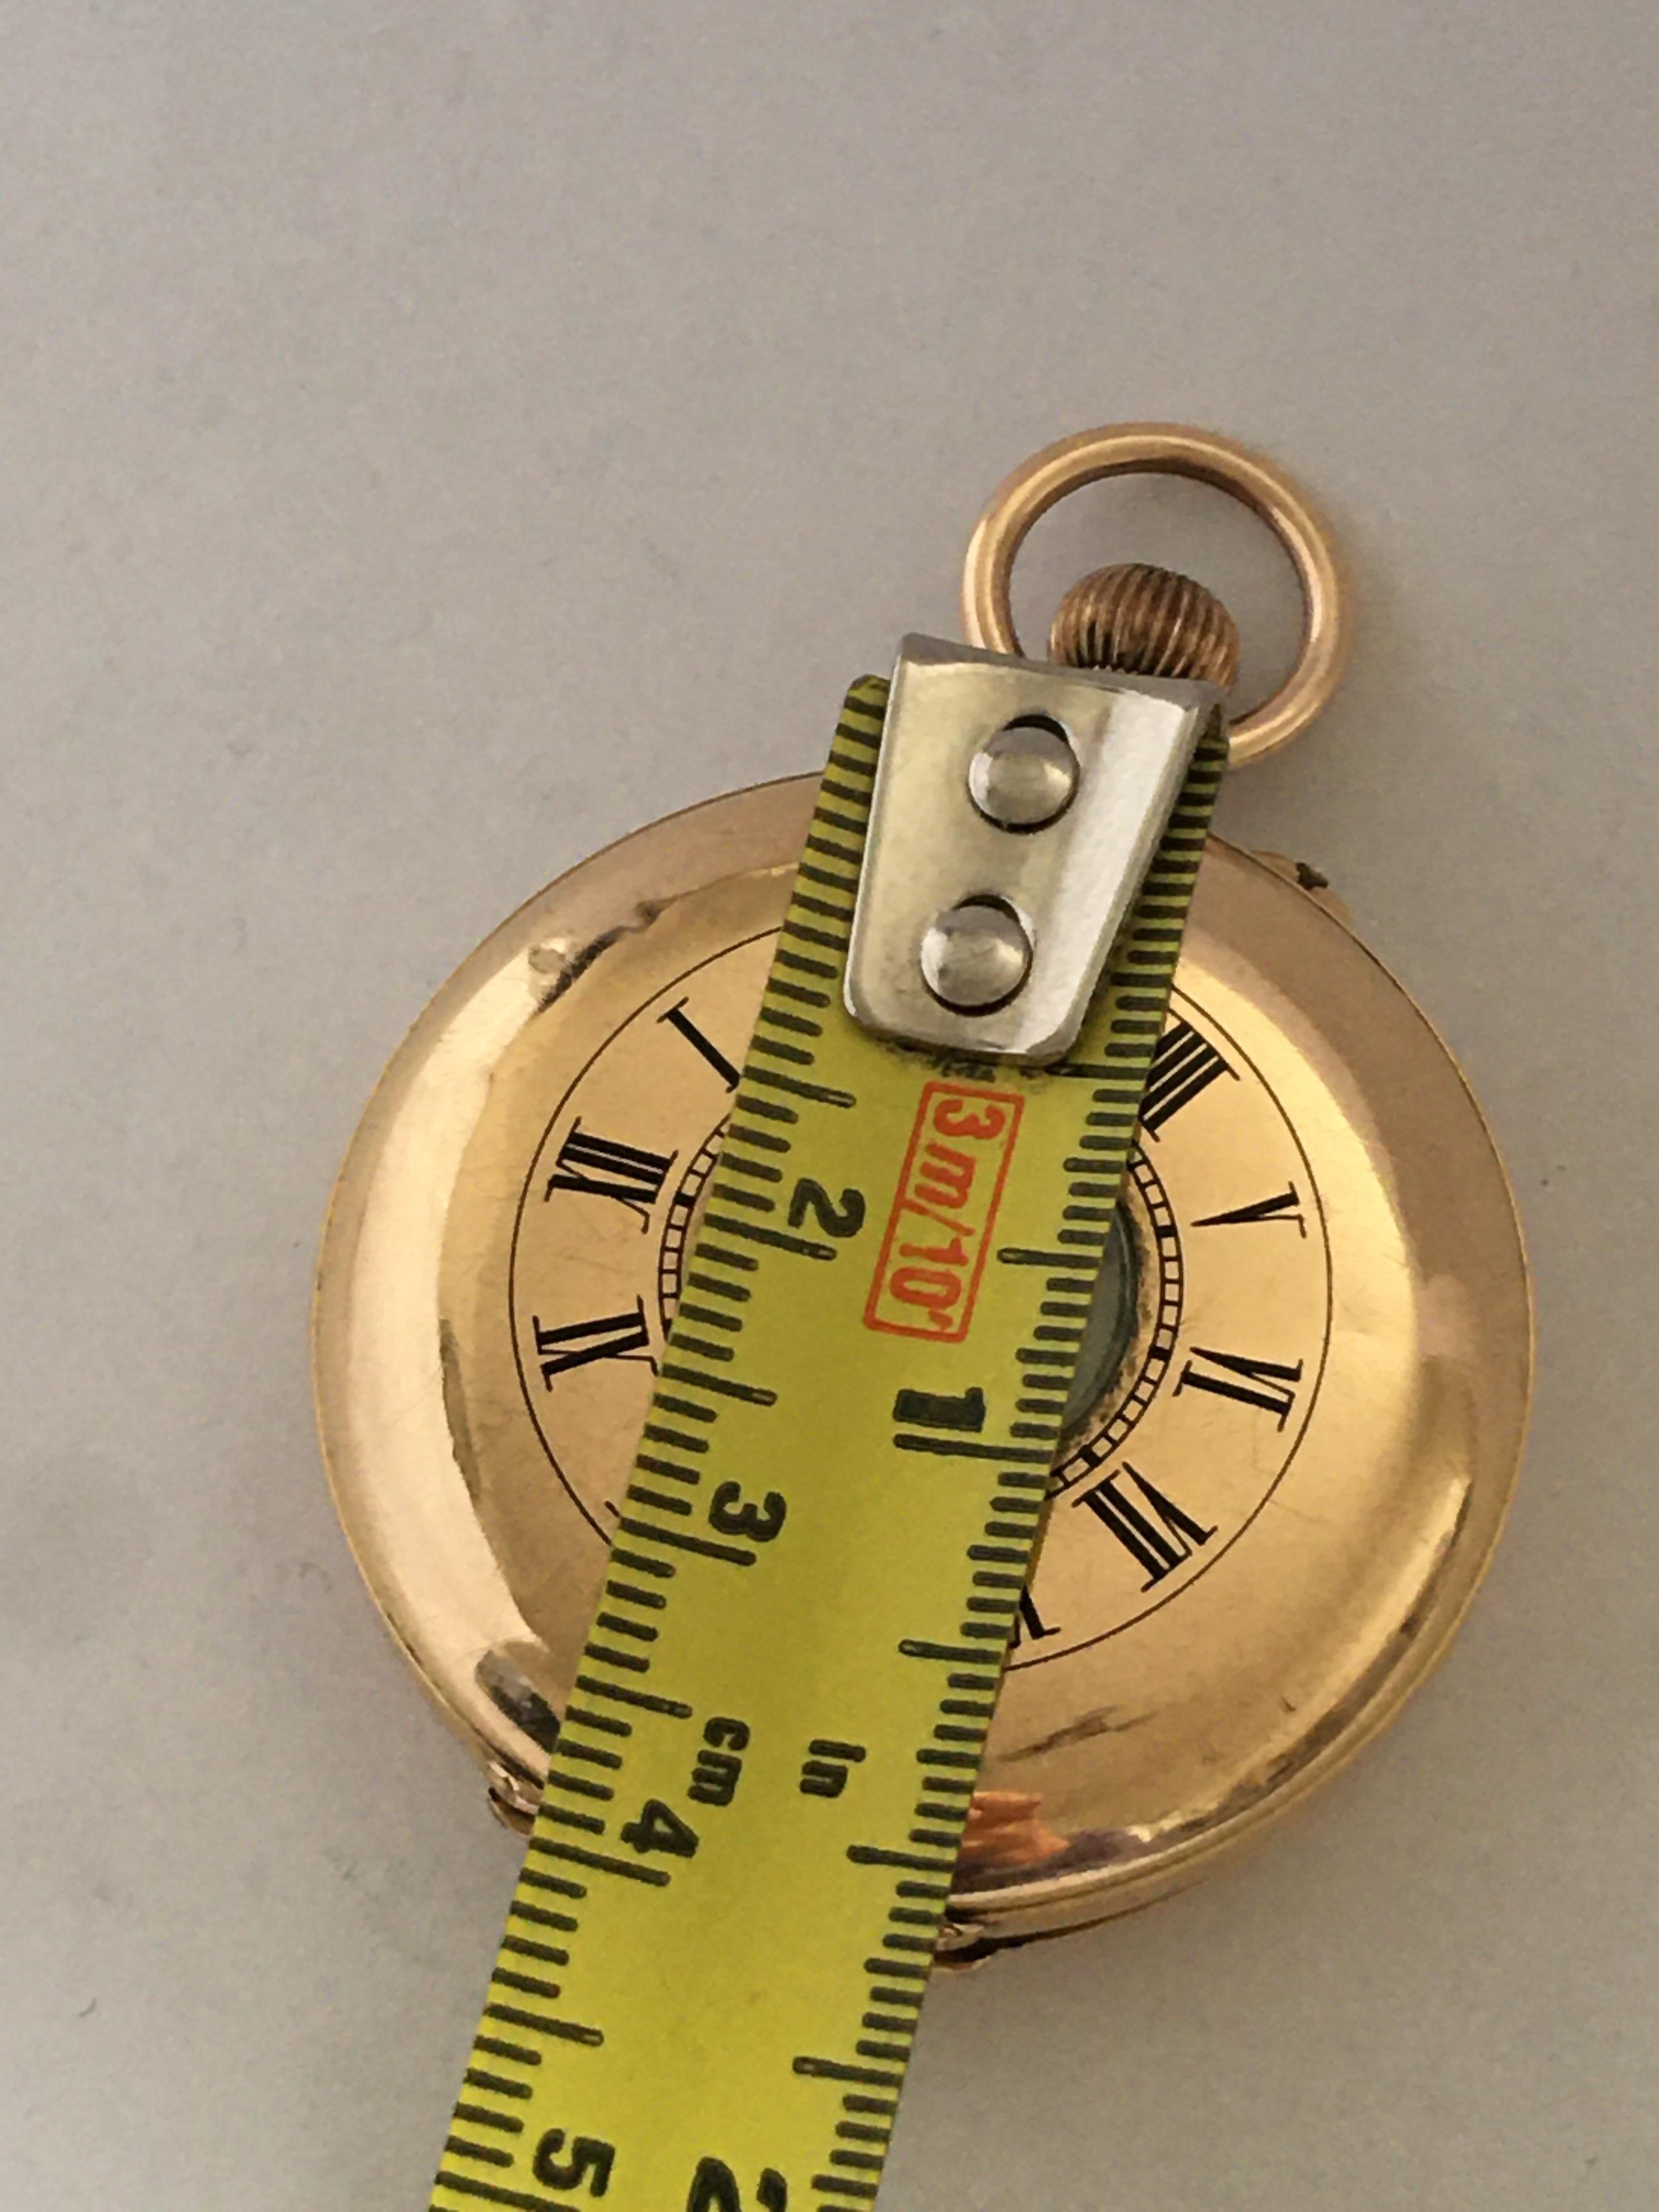 Small 18 Karat Gold Half Hunter Hand-Winding Pocket Watch Signed Harris & Co. In Good Condition For Sale In Carlisle, GB